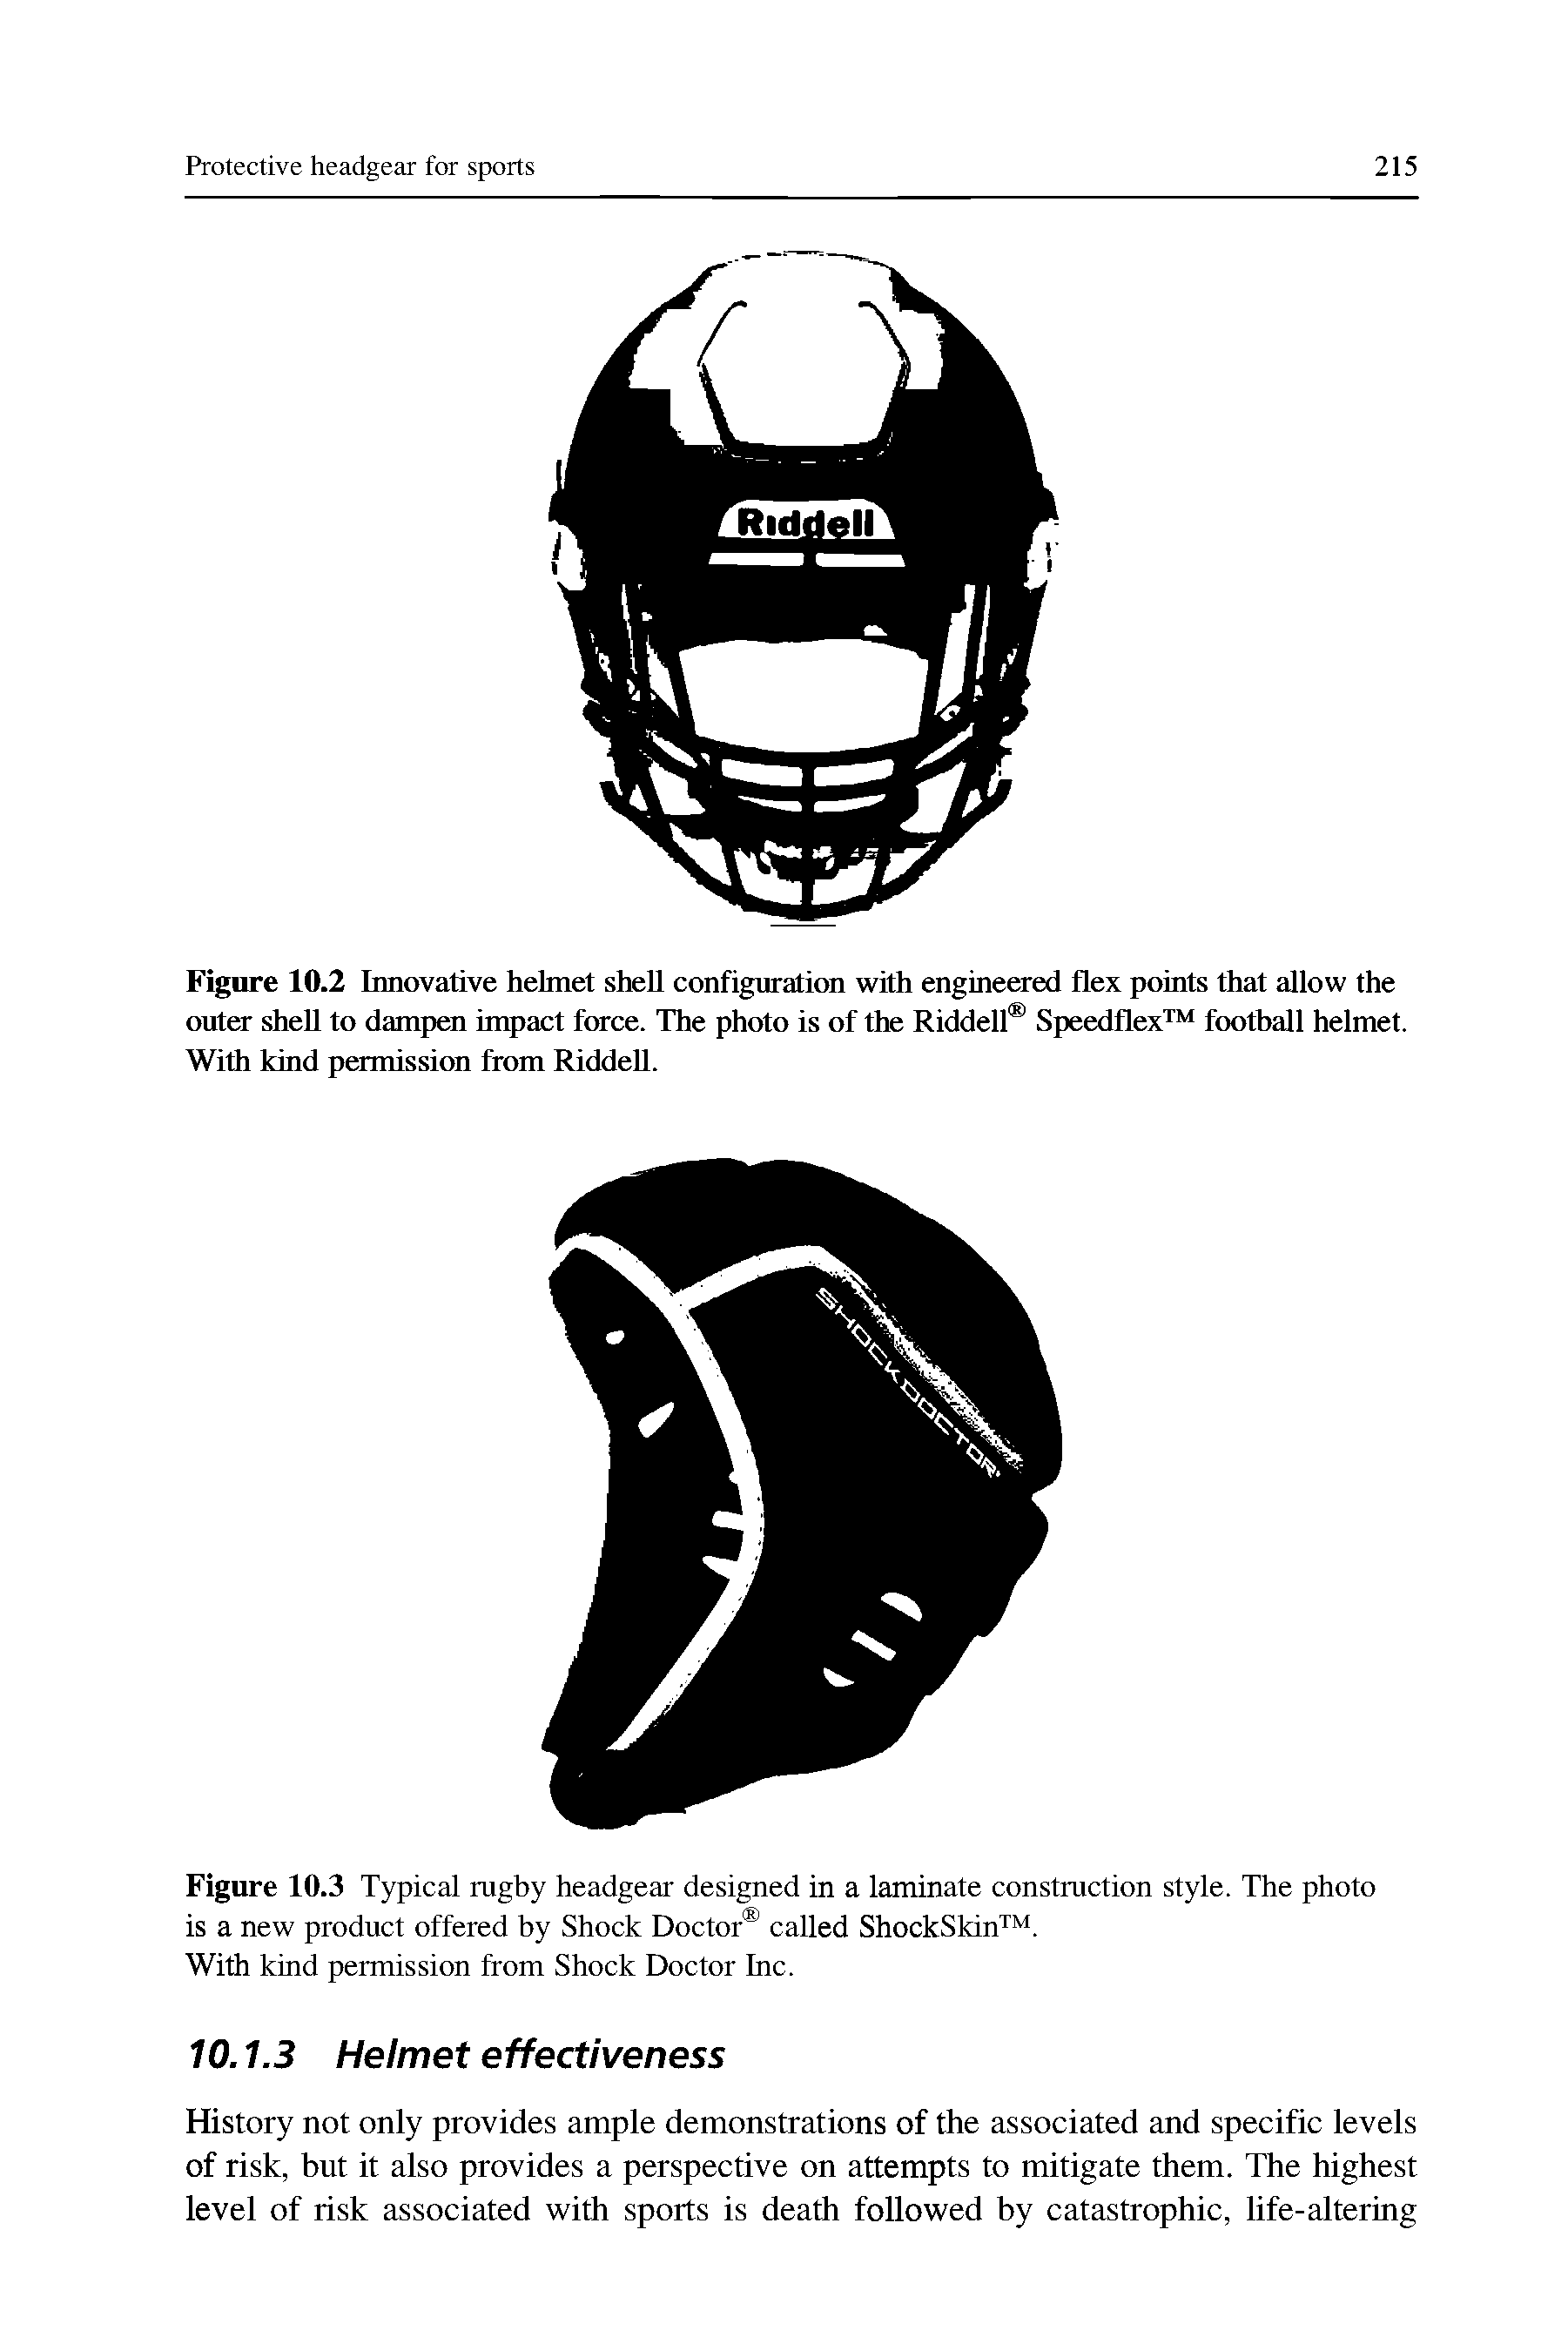 Figure 10.2 Innovative helmet shell configuration with engineered flex points that allow the outer shell to damprai impact force. The photo is of the Riddell Speedflex football helmet. With kind permission from RiddeU.